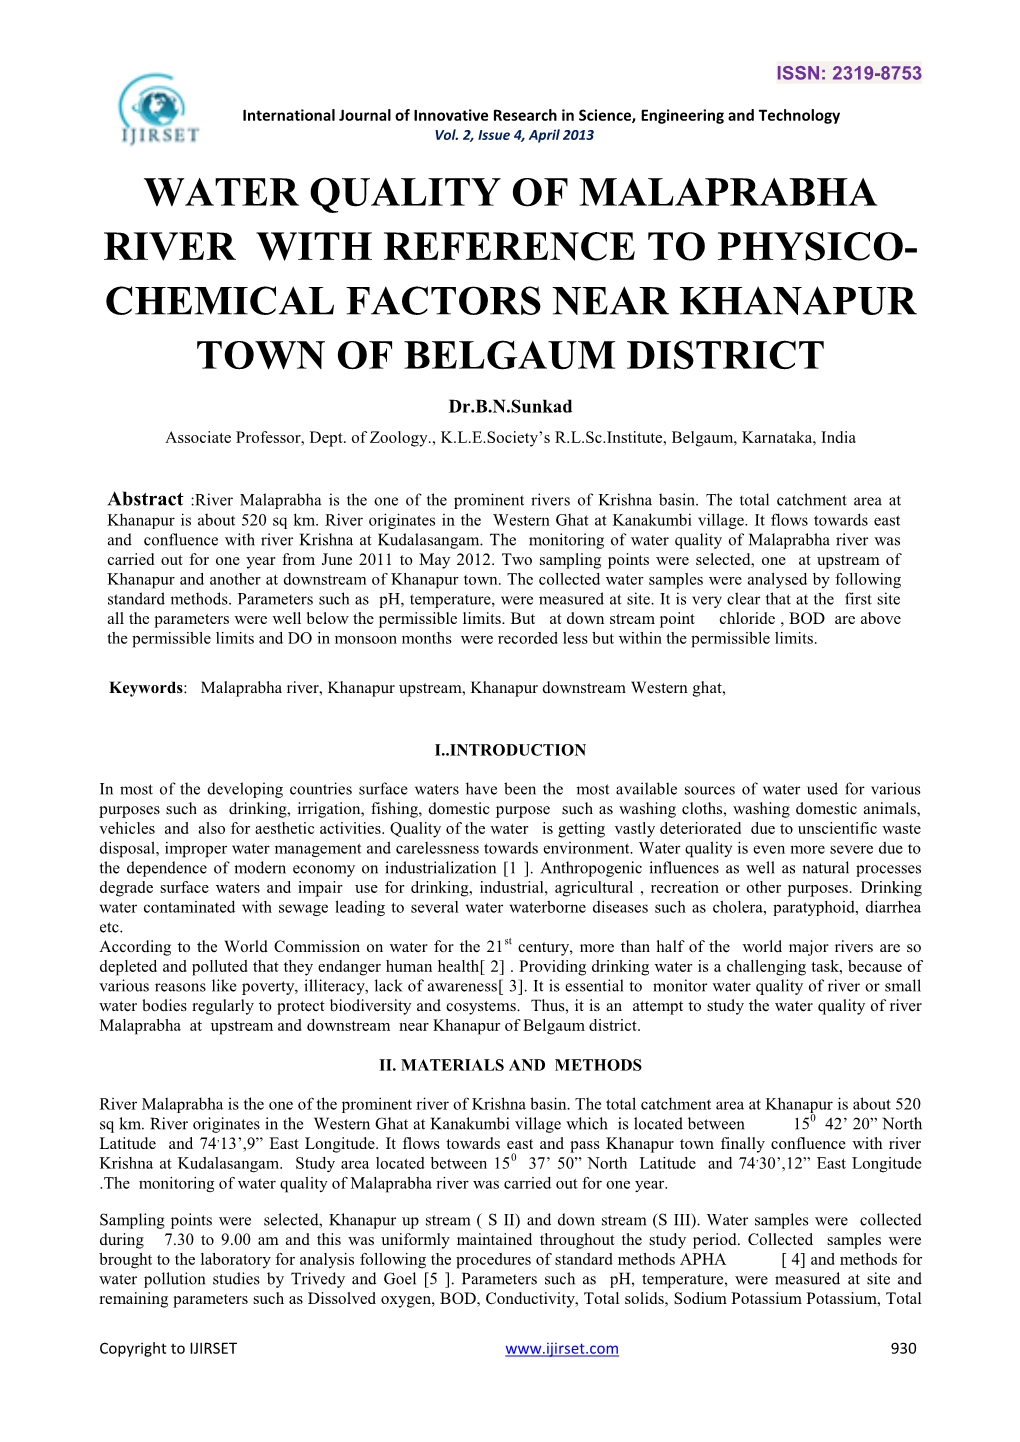 Water Quality of Malaprabha River with Reference to Physico- Chemical Factors Near Khanapur